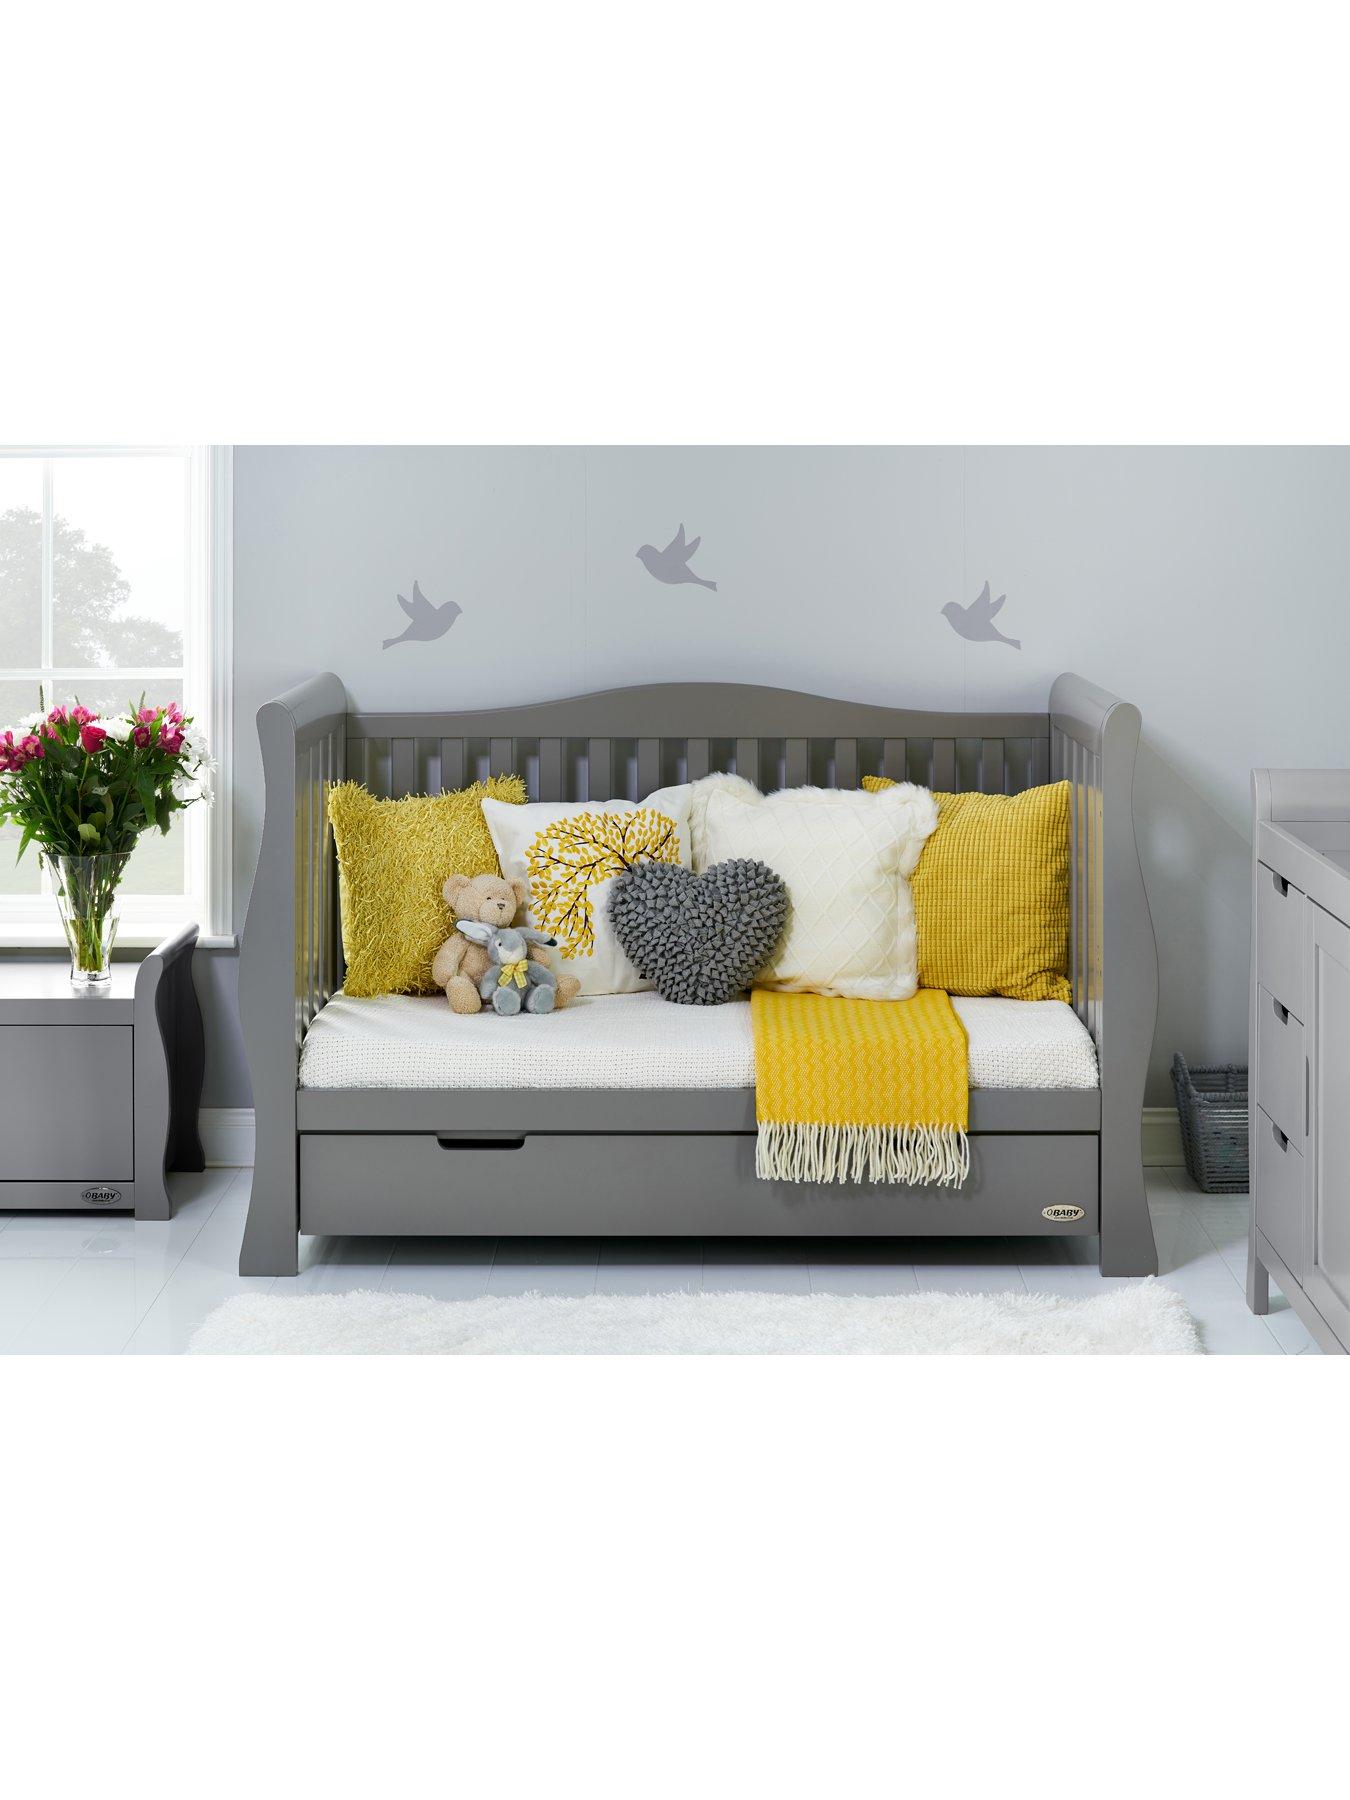 stamford luxe cot bed